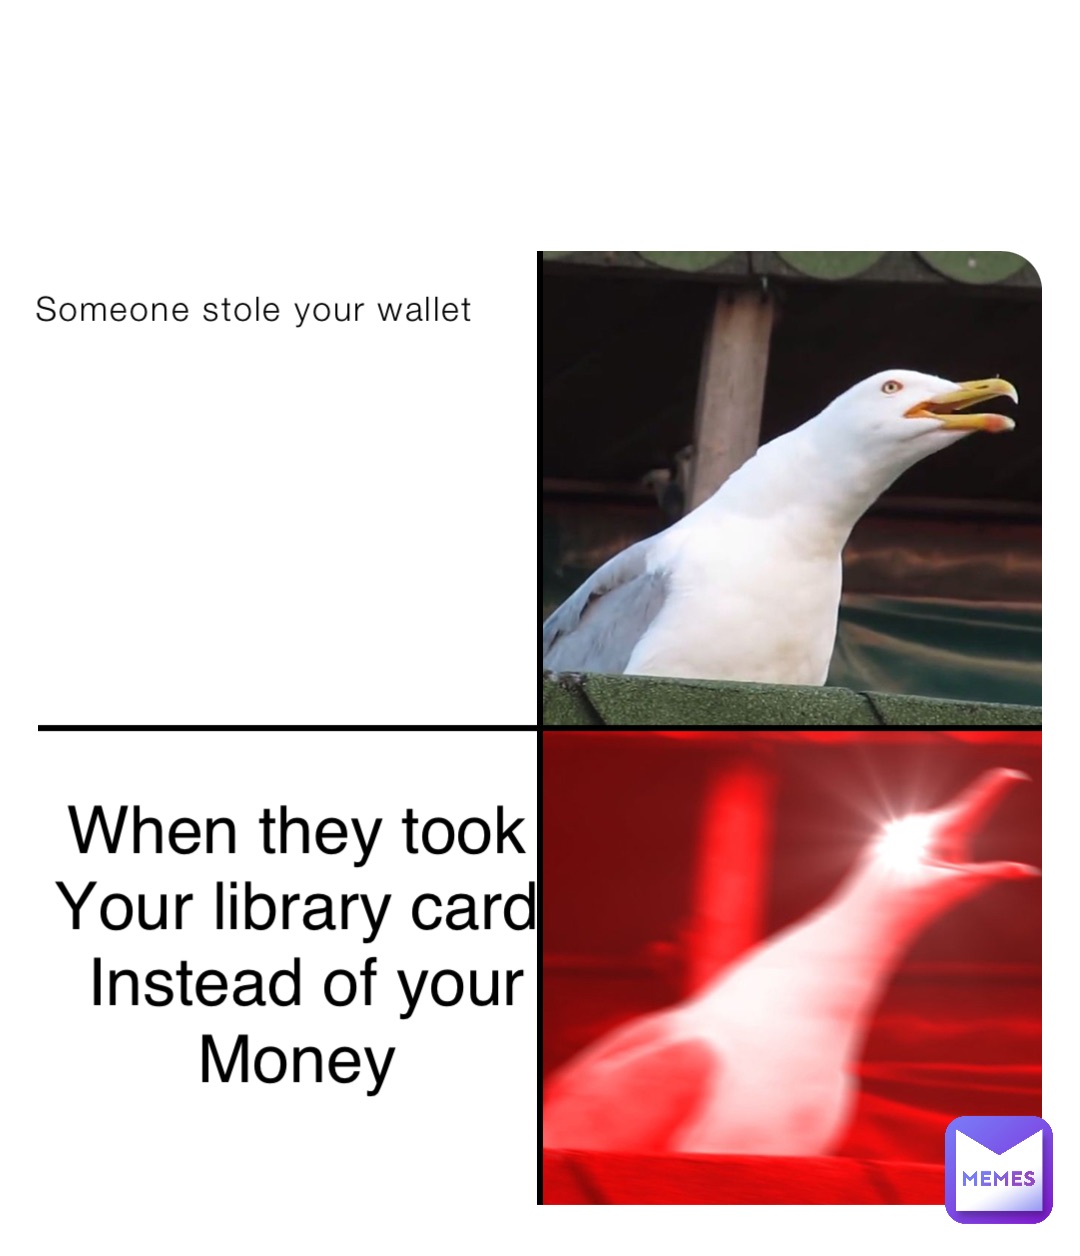 Someone stole your wallet When they took
Your library card
Instead of your 
Money